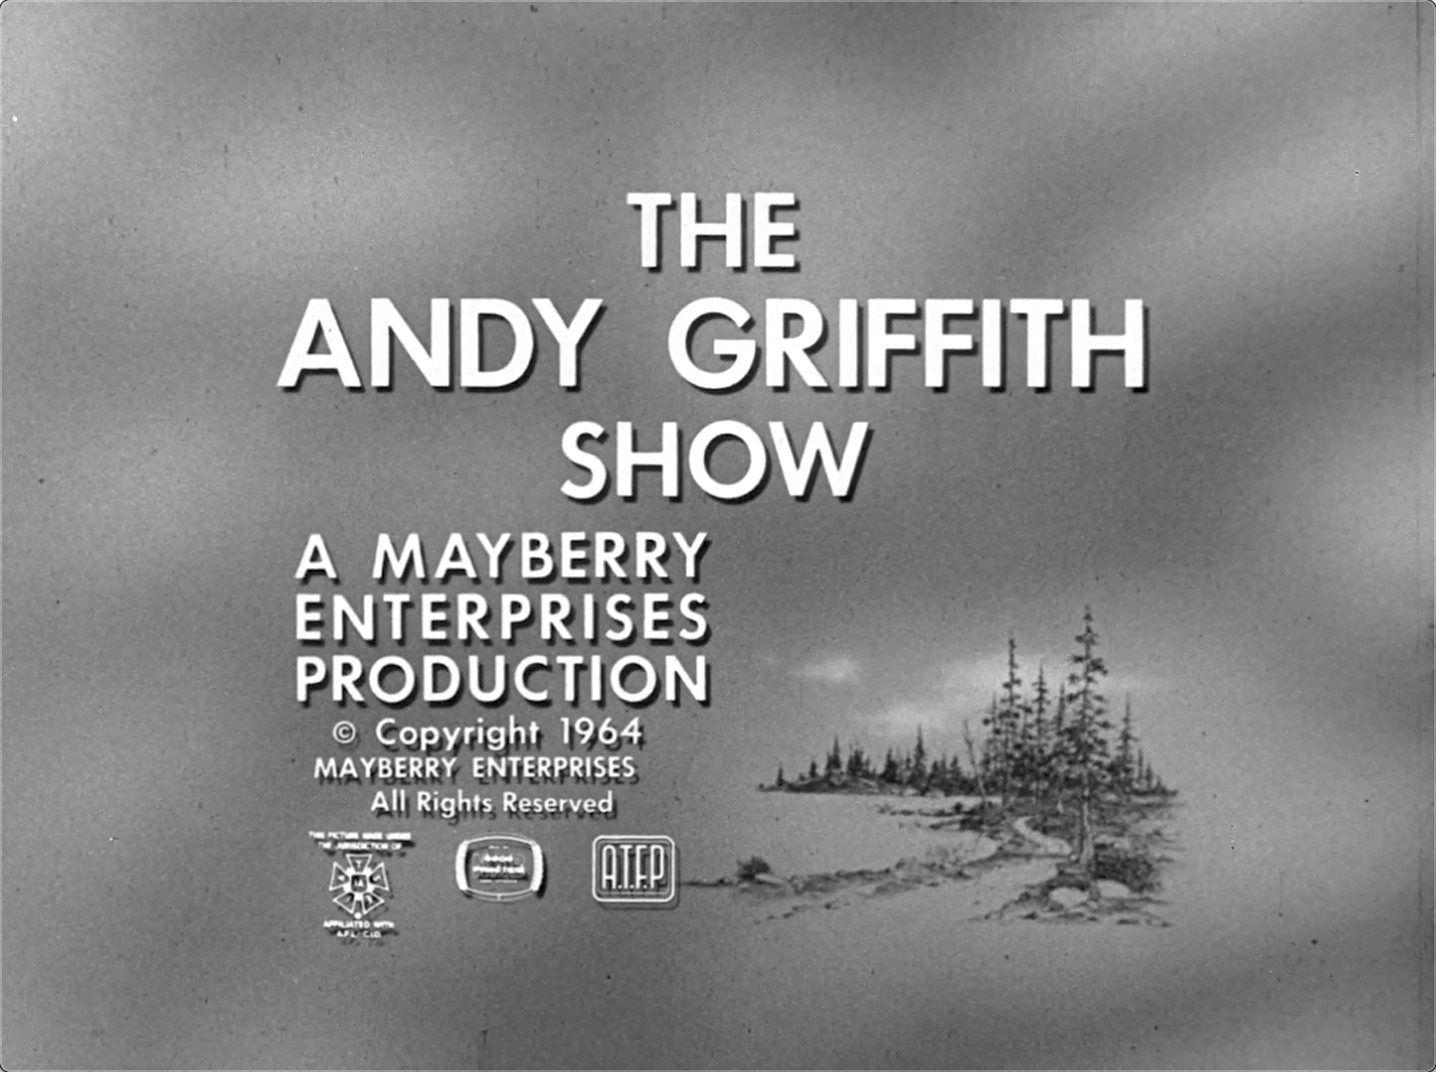 The Andy Griffith Show S04E18 Prisoner Of Love (Feb.10.1964)-203.jpg